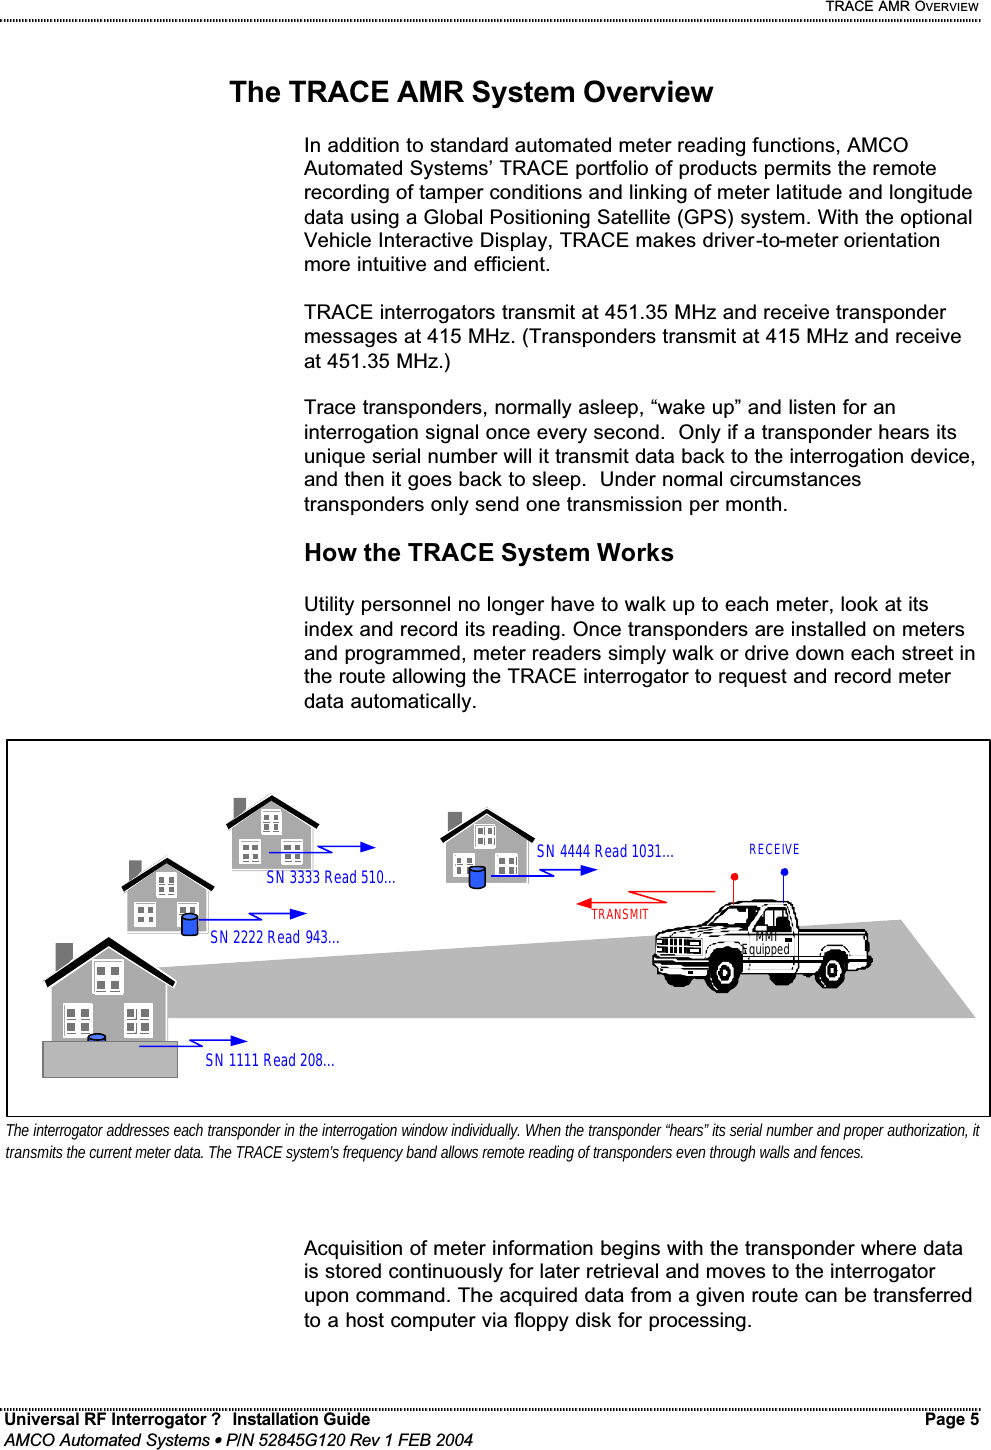     TRACE AMR OVERVIEW Universal RF Interrogator ?  Installation Guide    Page 5  AMCO Automated Systems • P/N 52845G120 Rev 1 FEB 2004                                                                                                                                 The TRACE AMR System Overview  In addition to standard automated meter reading functions, AMCO Automated Systems’ TRACE portfolio of products permits the remote recording of tamper conditions and linking of meter latitude and longitude data using a Global Positioning Satellite (GPS) system. With the optional Vehicle Interactive Display, TRACE makes driver-to-meter orientation more intuitive and efficient.   TRACE interrogators transmit at 451.35 MHz and receive transponder messages at 415 MHz. (Transponders transmit at 415 MHz and receive at 451.35 MHz.)    Trace transponders, normally asleep, “wake up” and listen for an interrogation signal once every second.  Only if a transponder hears its unique serial number will it transmit data back to the interrogation device, and then it goes back to sleep.  Under normal circumstances transponders only send one transmission per month.    How the TRACE System Works  Utility personnel no longer have to walk up to each meter, look at its index and record its reading. Once transponders are installed on meters and programmed, meter readers simply walk or drive down each street in the route allowing the TRACE interrogator to request and record meter data automatically.  Acquisition of meter information begins with the transponder where data is stored continuously for later retrieval and moves to the interrogator upon command. The acquired data from a given route can be transferred to a host computer via floppy disk for processing.    SN 1111 Read 208… SN 2222 Read 943… MMI Equipped SN 3333 Read 510… SN 4444 Read 1031… TRANSMIT RECEIVE The interrogator addresses each transponder in the interrogation window individually. When the transponder “hears” its serial number and proper authorization, it transmits the current meter data. The TRACE system’s frequency band allows remote reading of transponders even through walls and fences.  